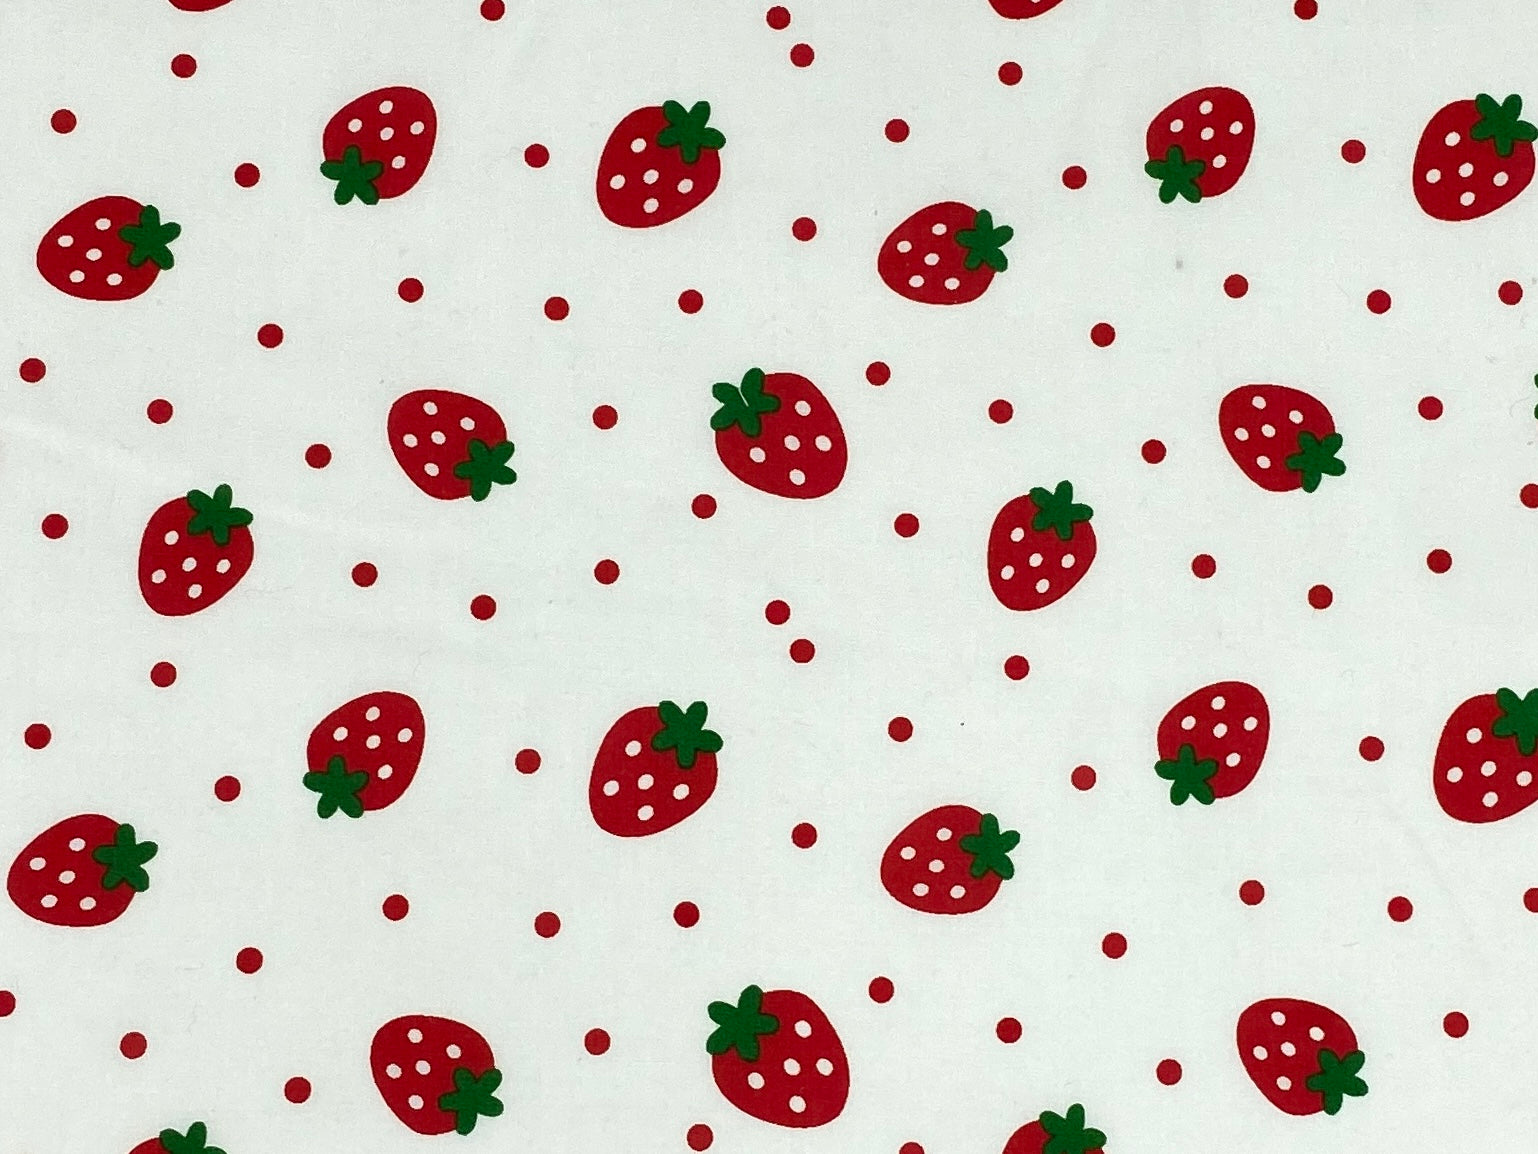 Large Strawberries With Polka Dots - Novelty Poly/Cotton Print